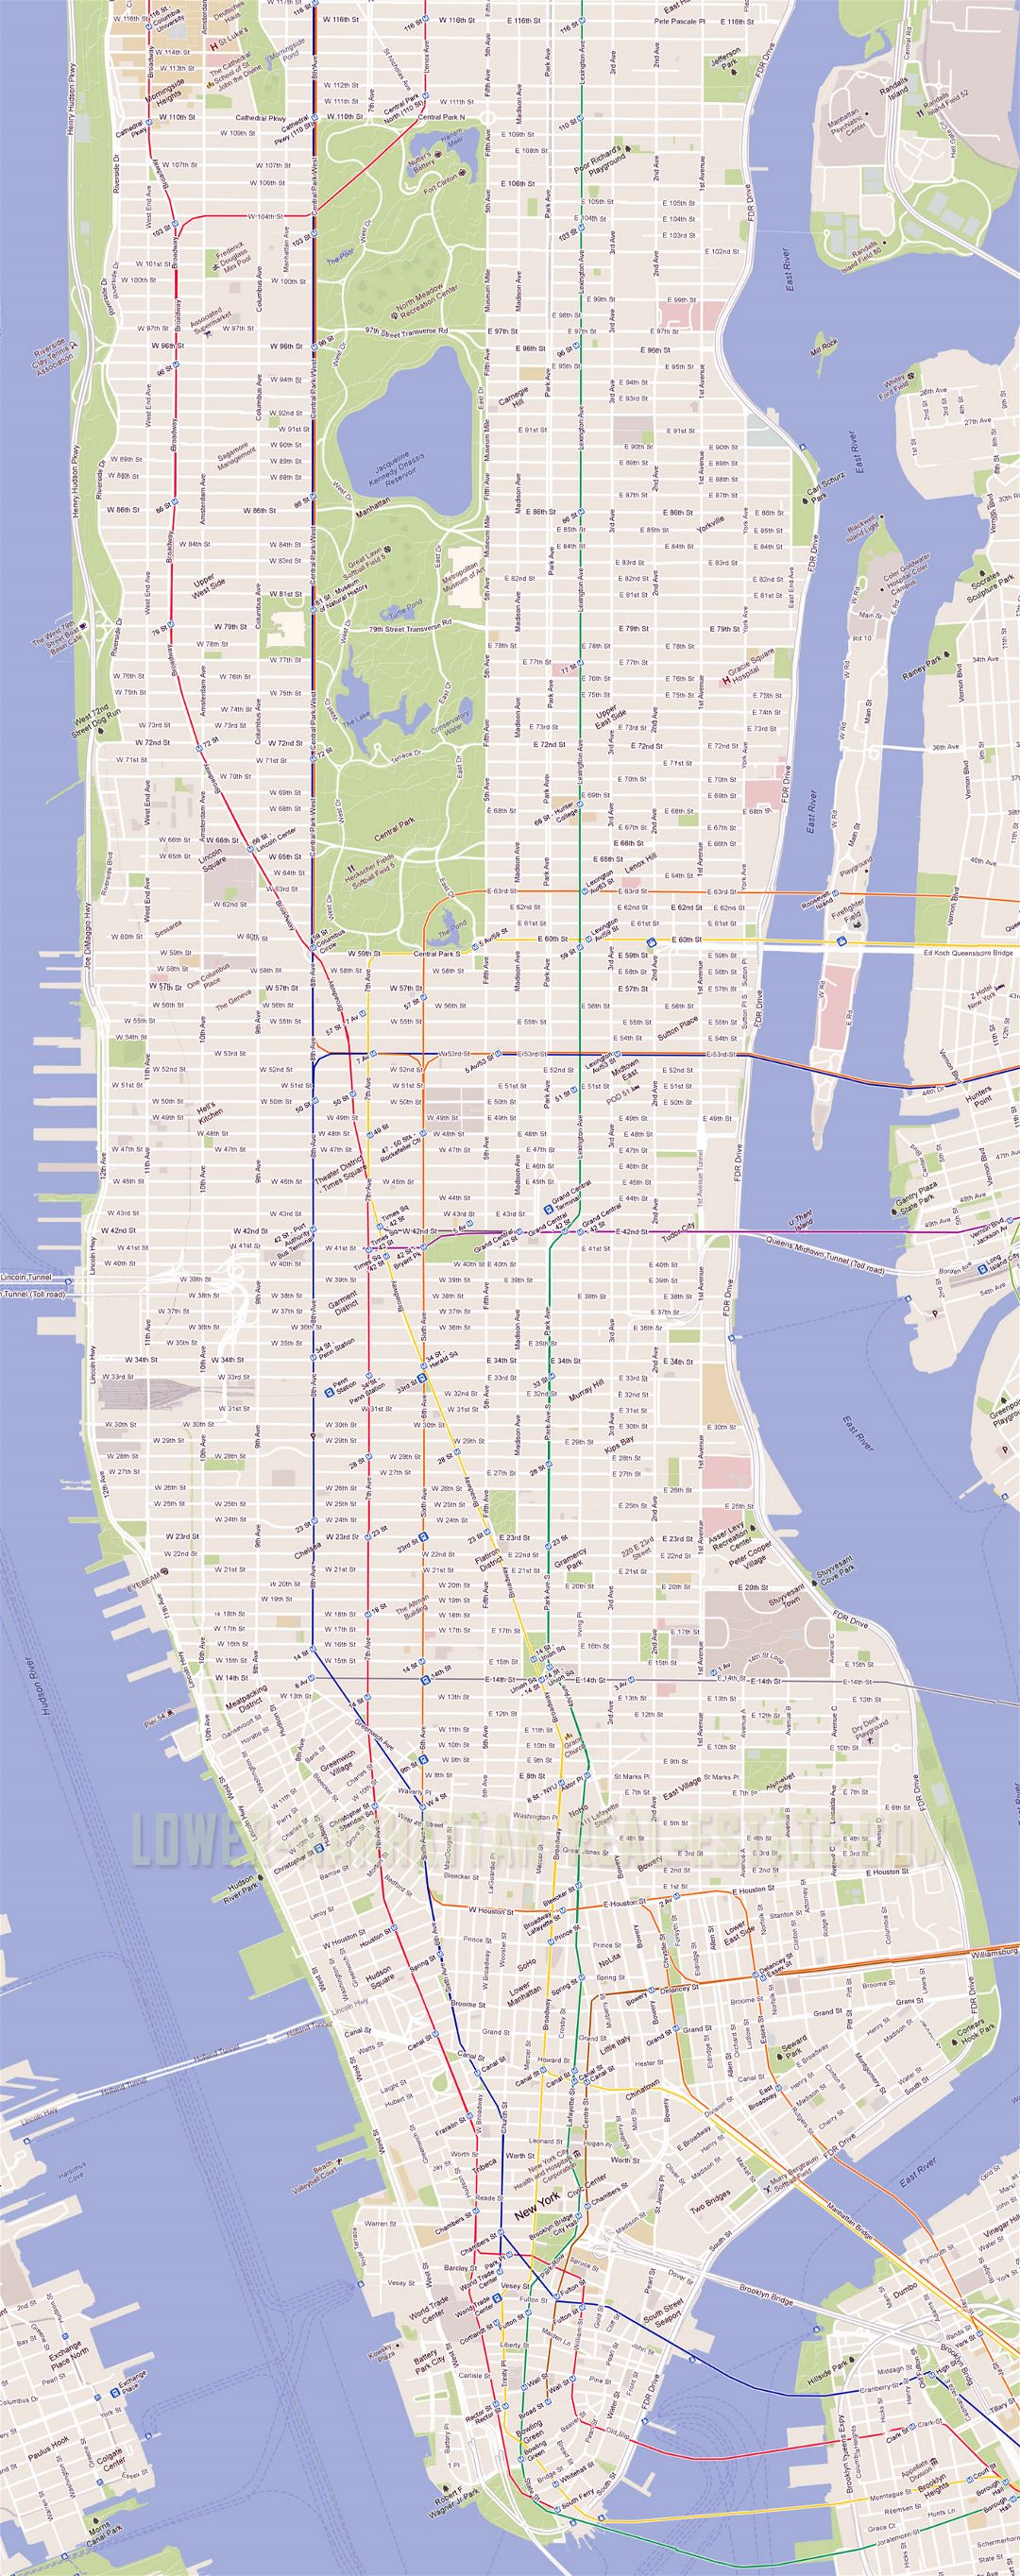 Detailed road map of Manhattan, NYC